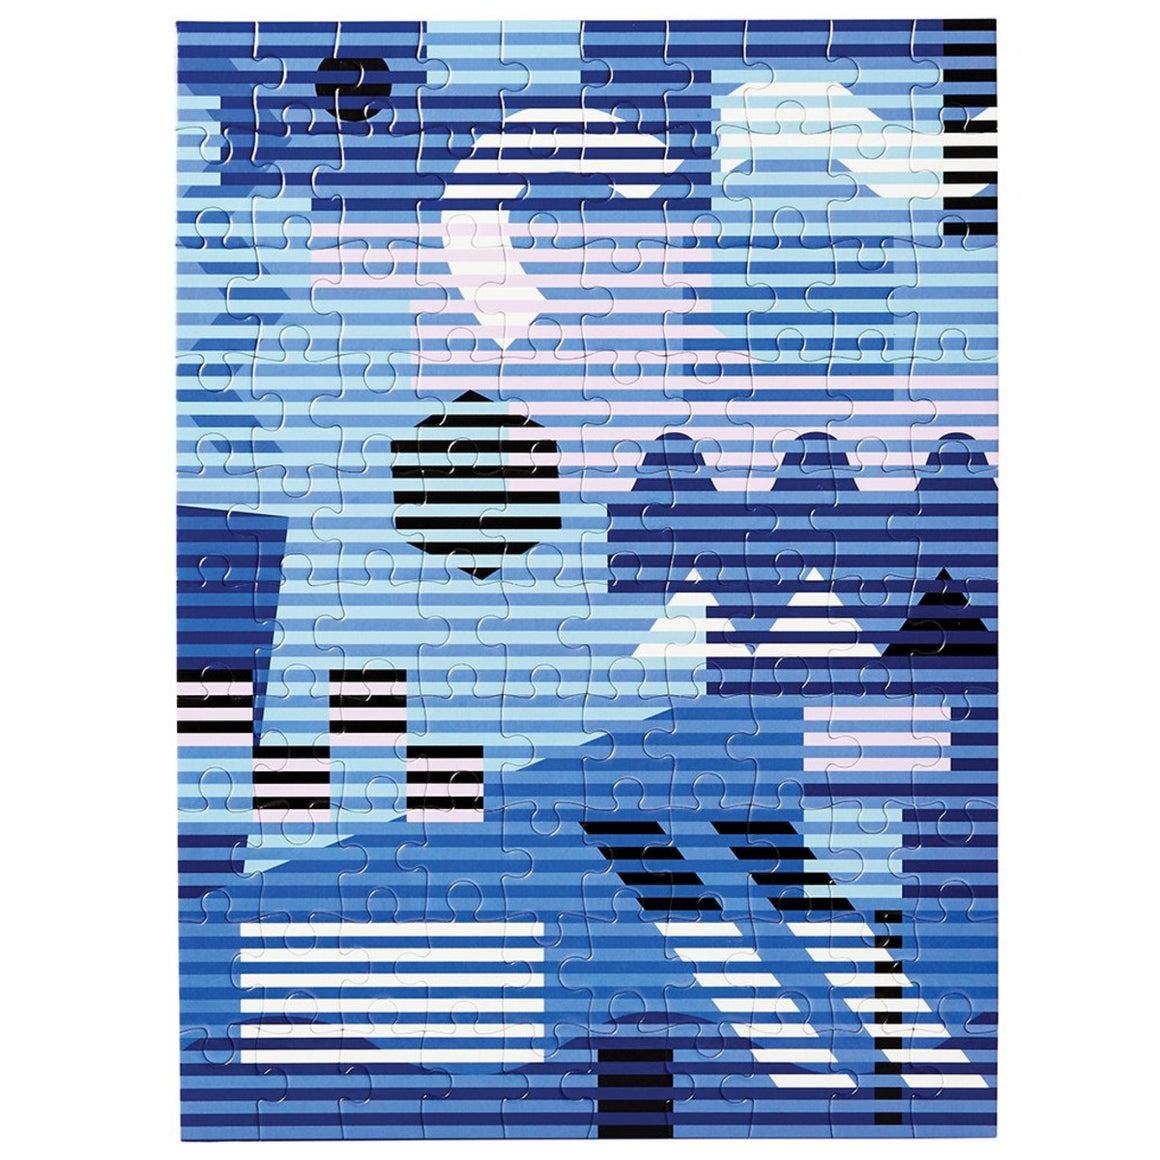 A 100 piece puzzle featuring an abstract design by Dusen Dusen. Geometric shapes and block colours are overlayed with horizontal stripes in bold and contrasting shades of blue, pastel pink, white and black.